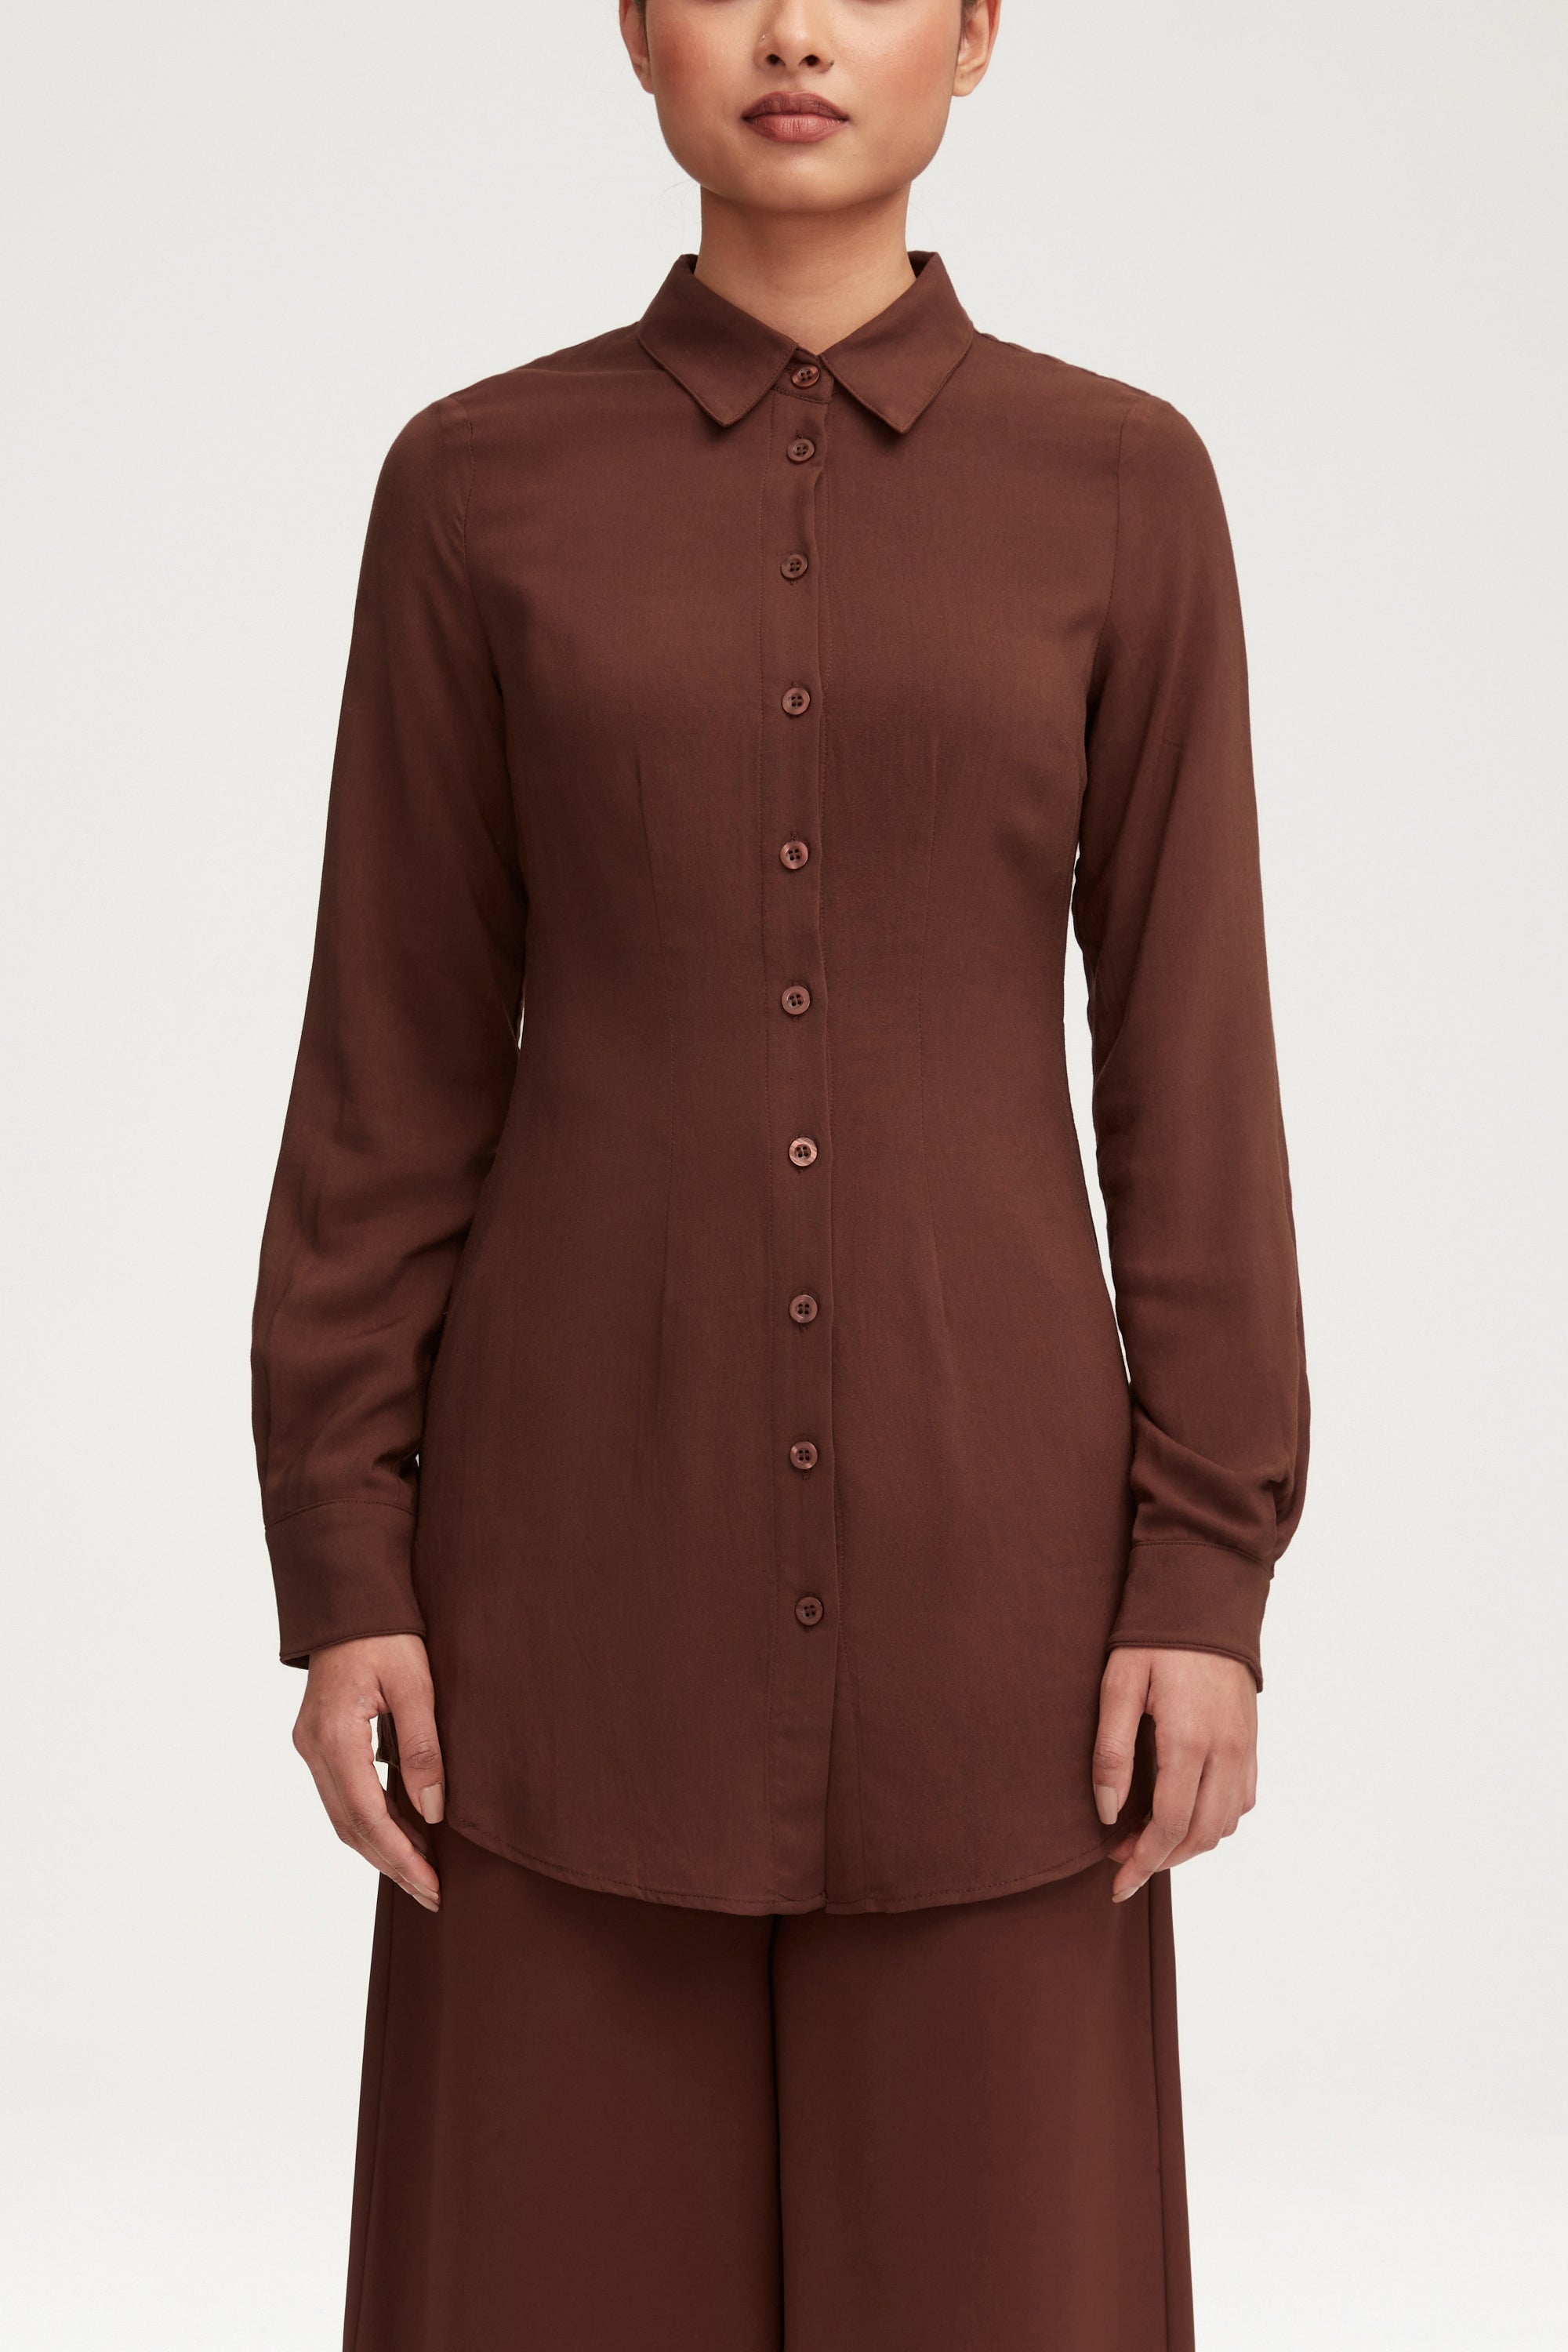 Sarah Fitted Button Down Top - Dark Brown Clothing epschoolboard 